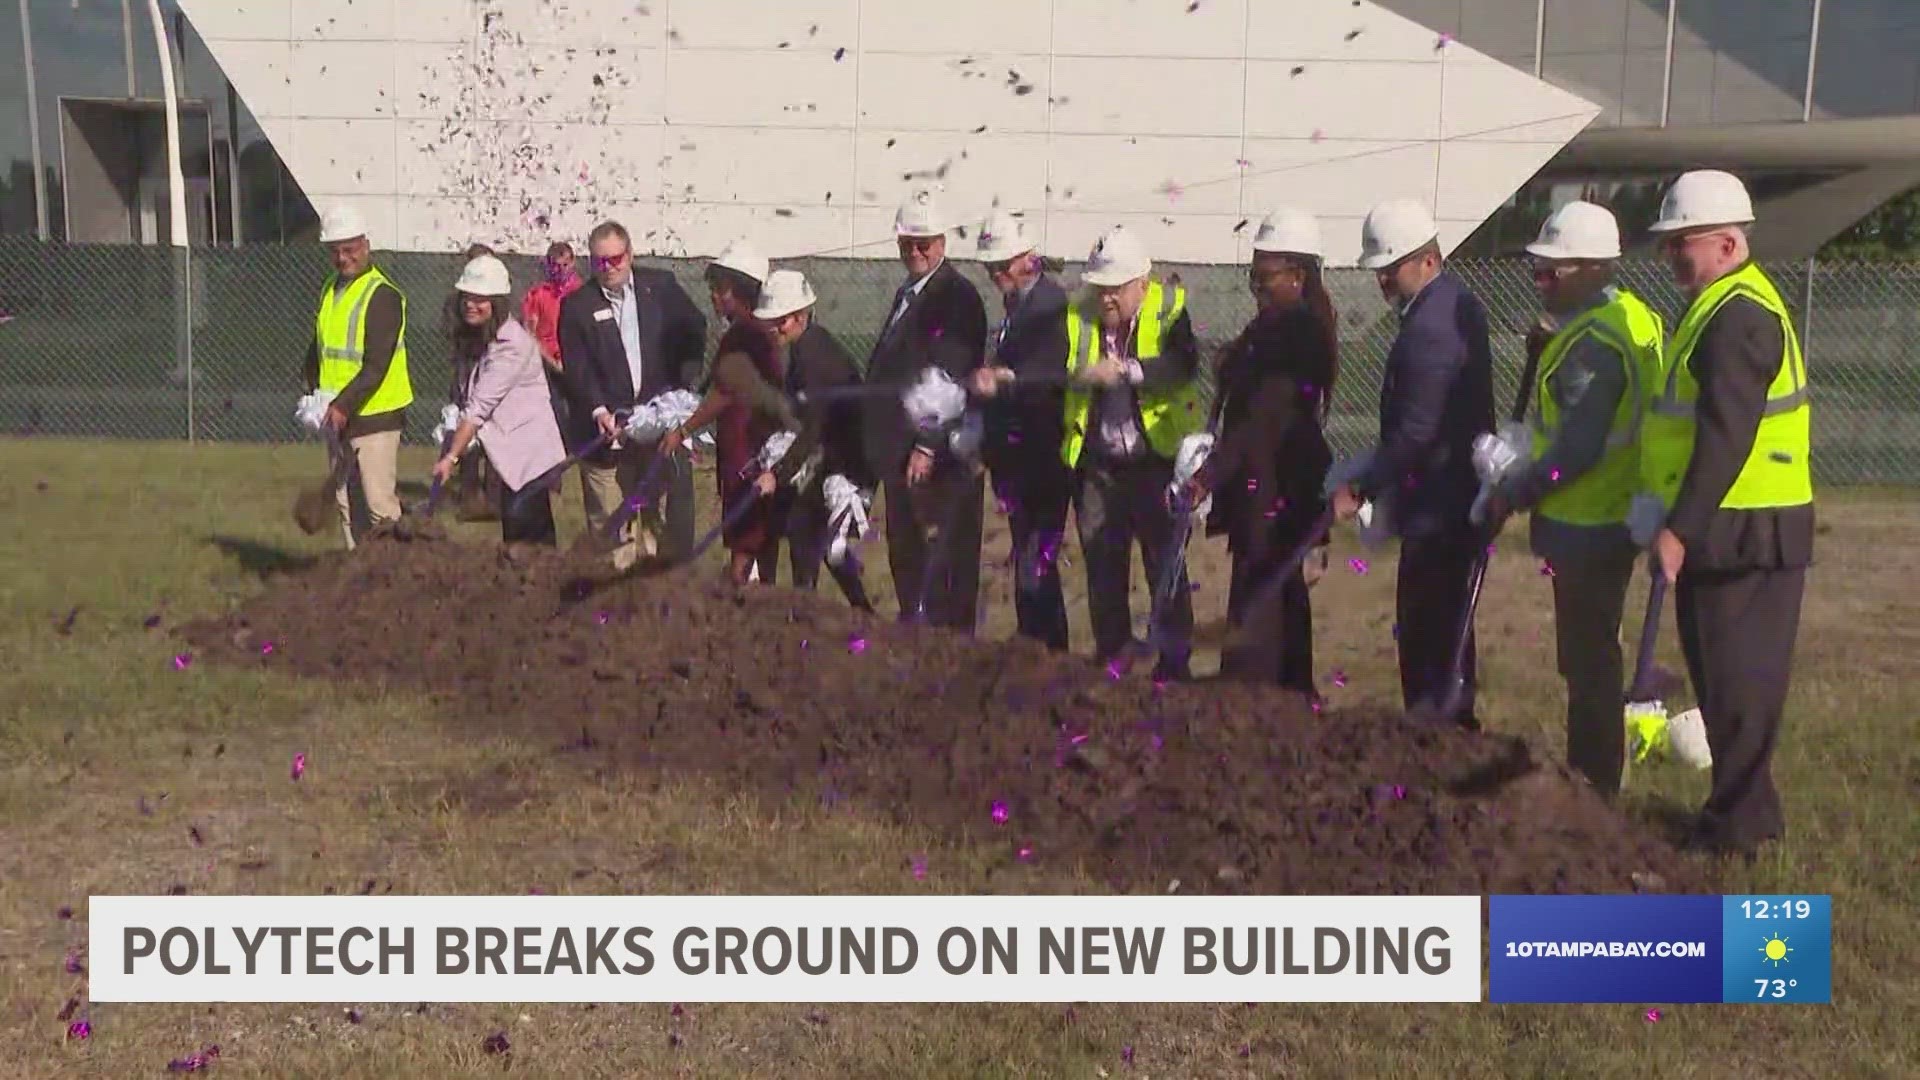 One of Florida's newest universities broke ground on its first engineering building.